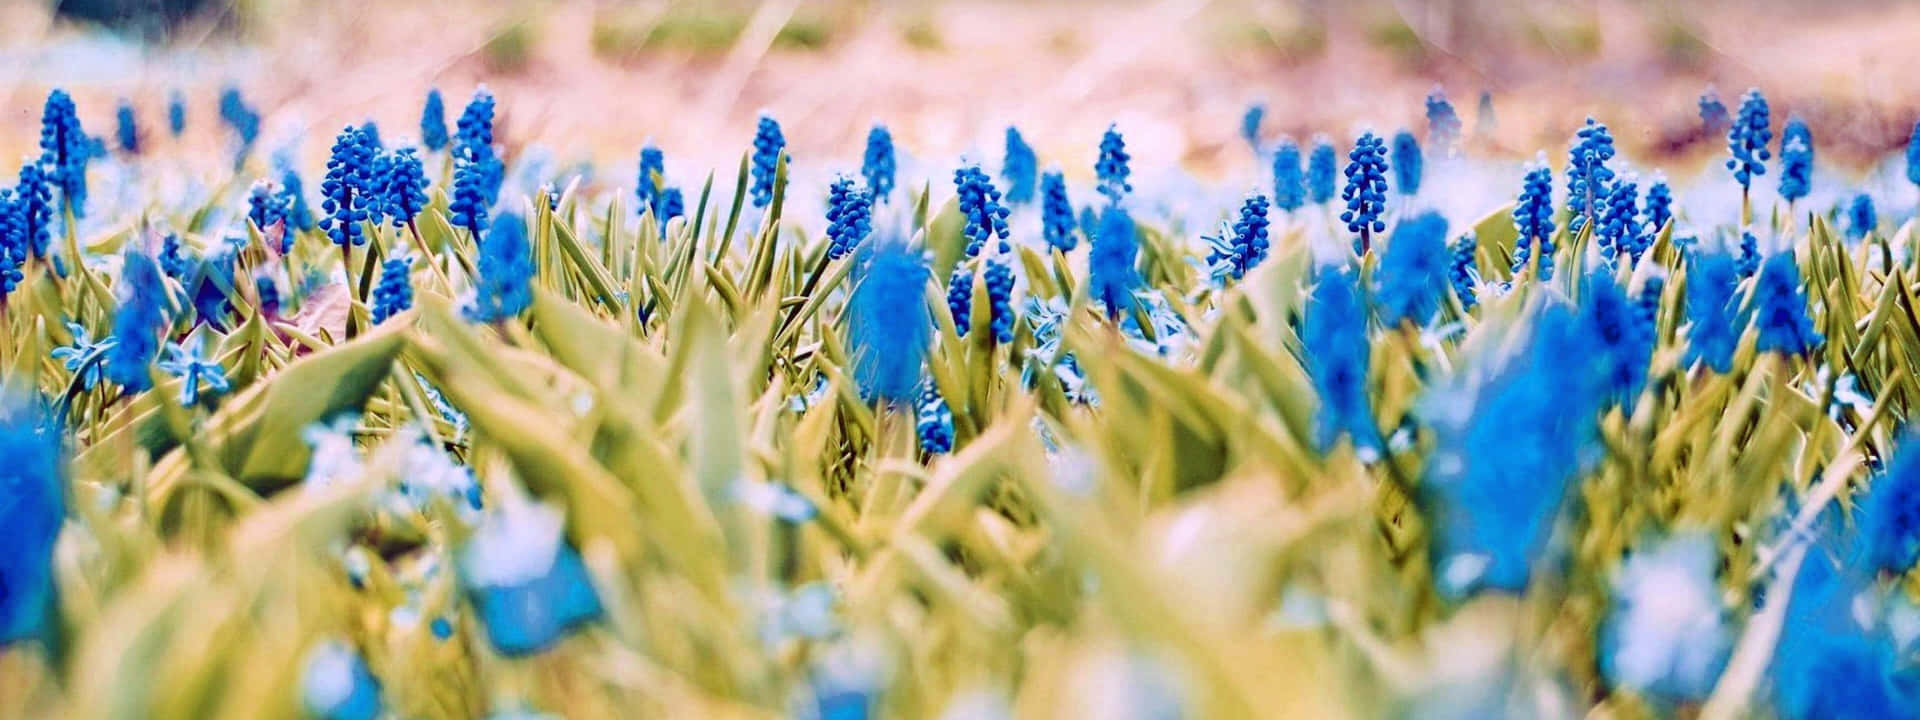 A Field Of Blue Flowers With A Blurry Background Wallpaper